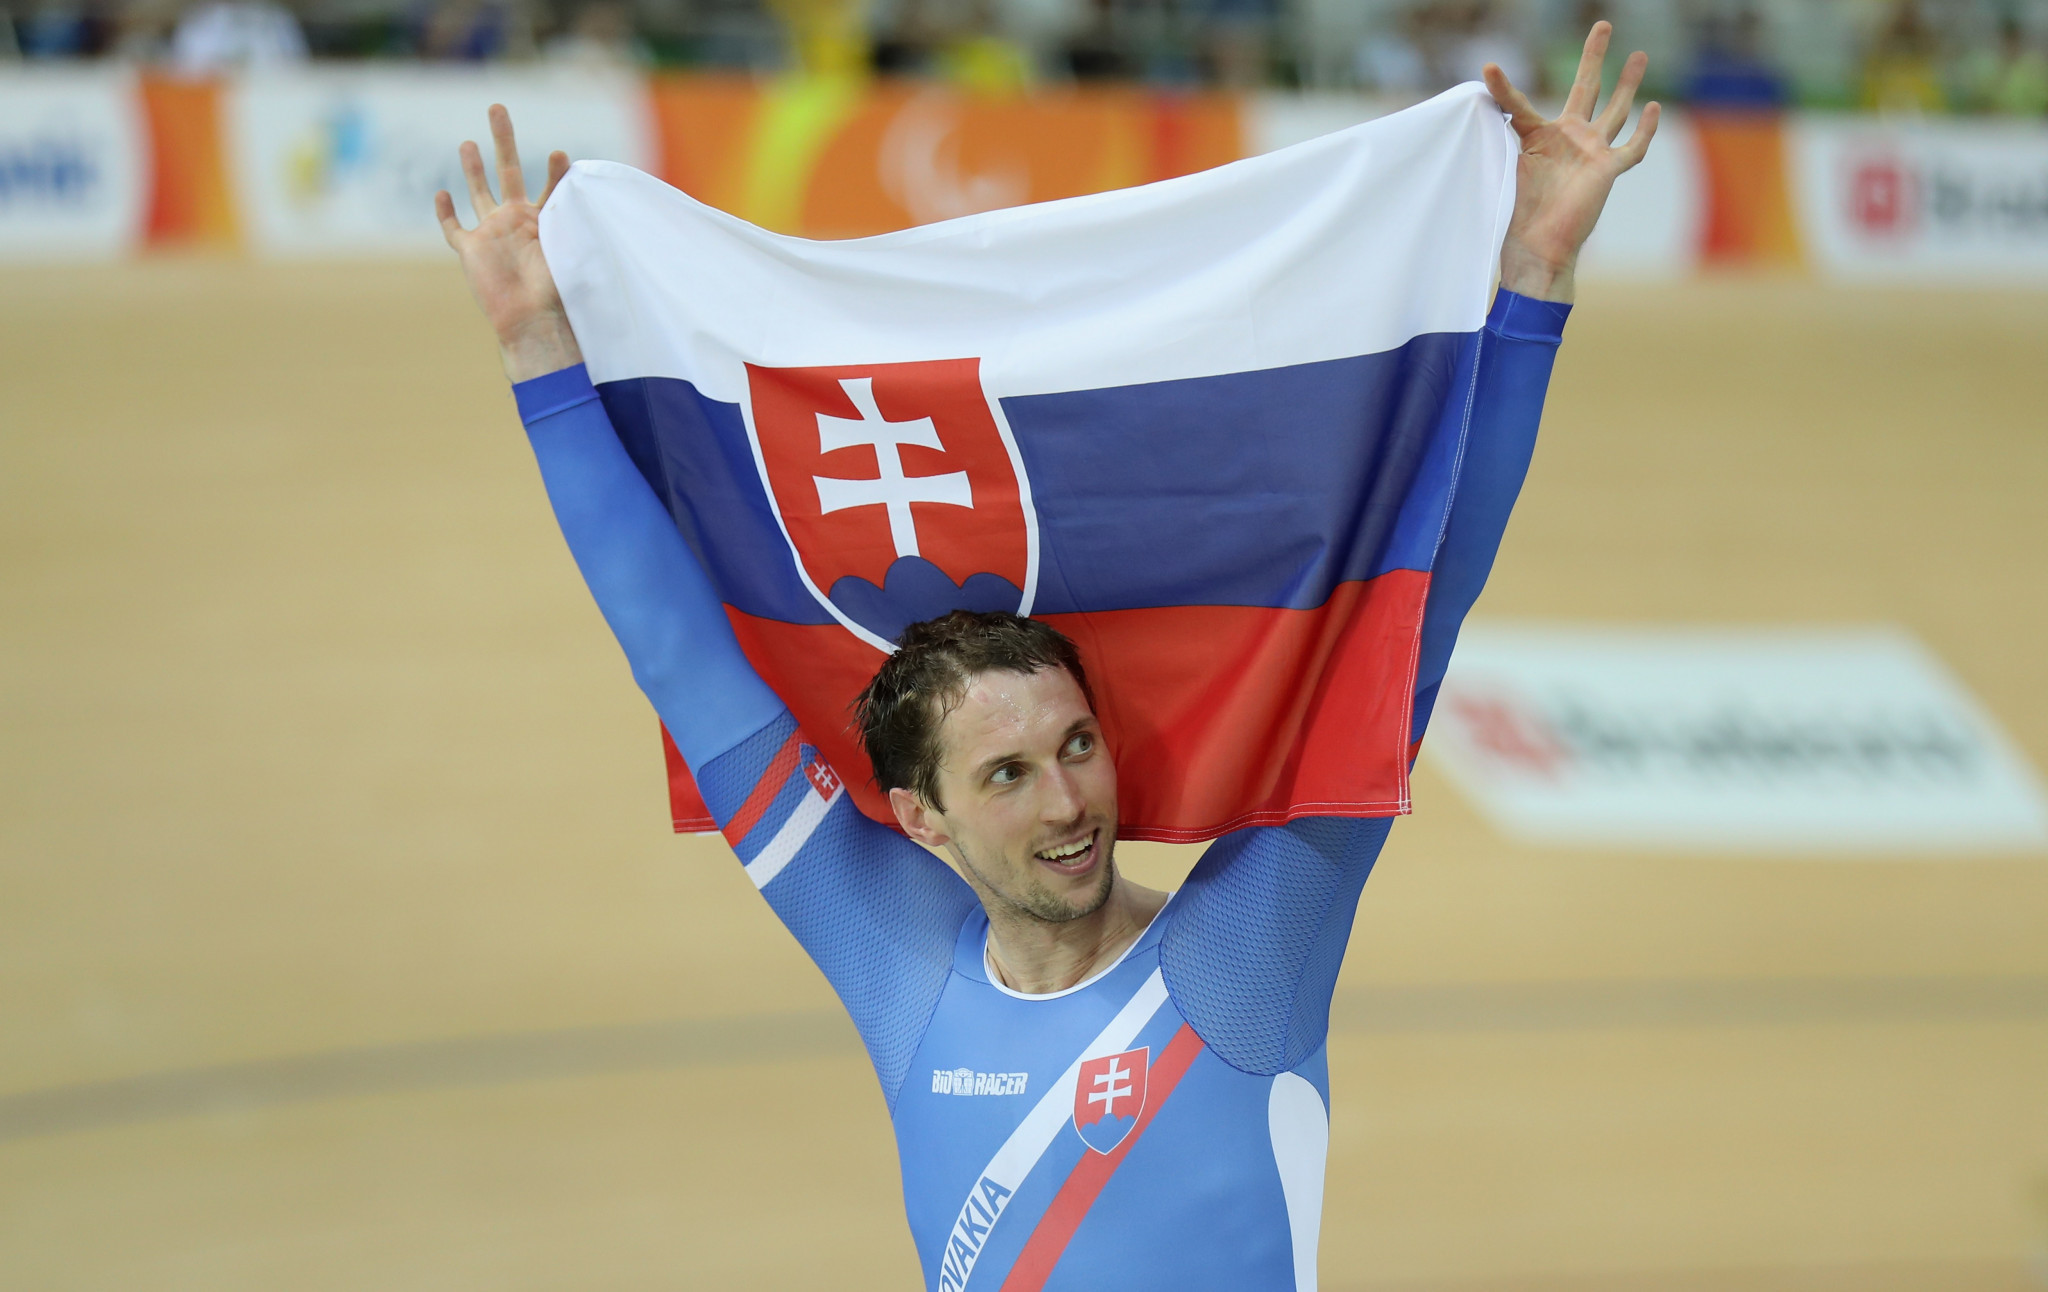 Slovakia's Jozef Metelka ended the event with three gold medals  ©Getty Images